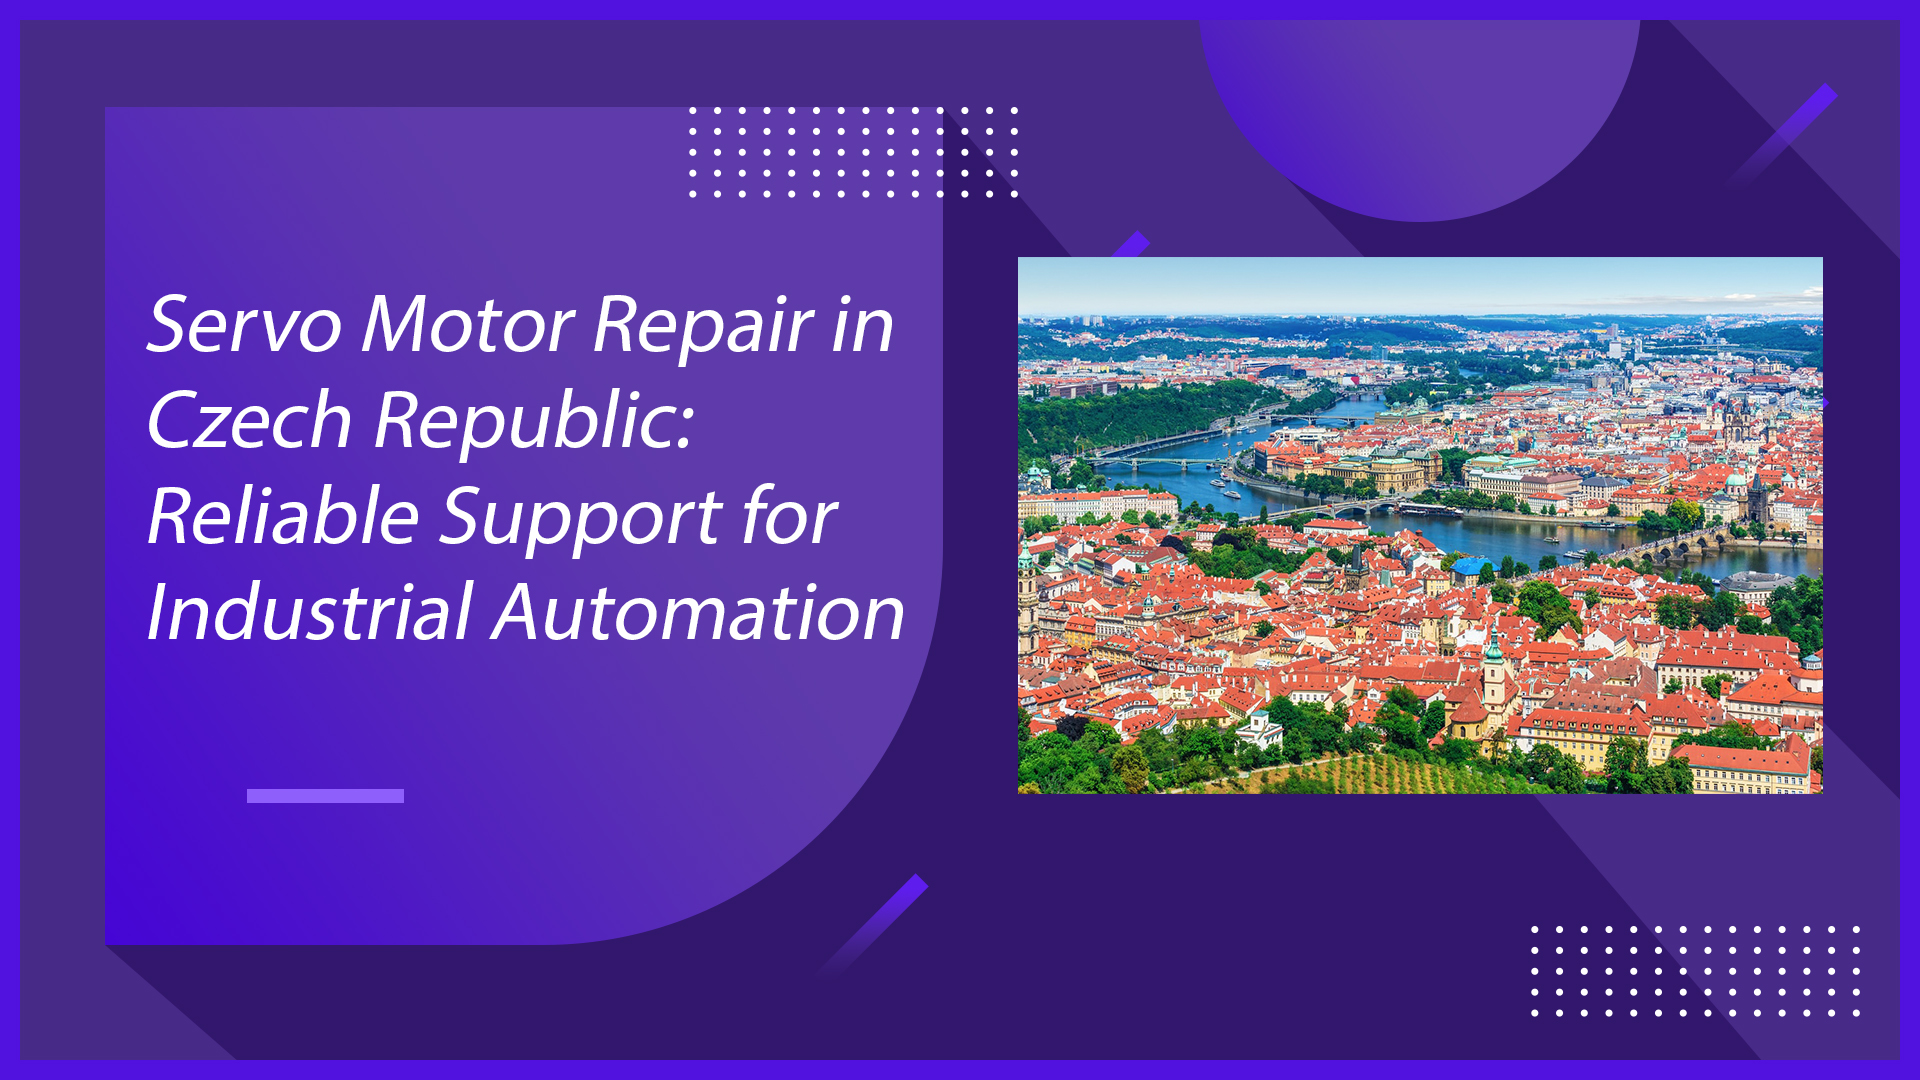 Servo Motor Repair in Czech Republic: Reliable Support for Industrial Automation